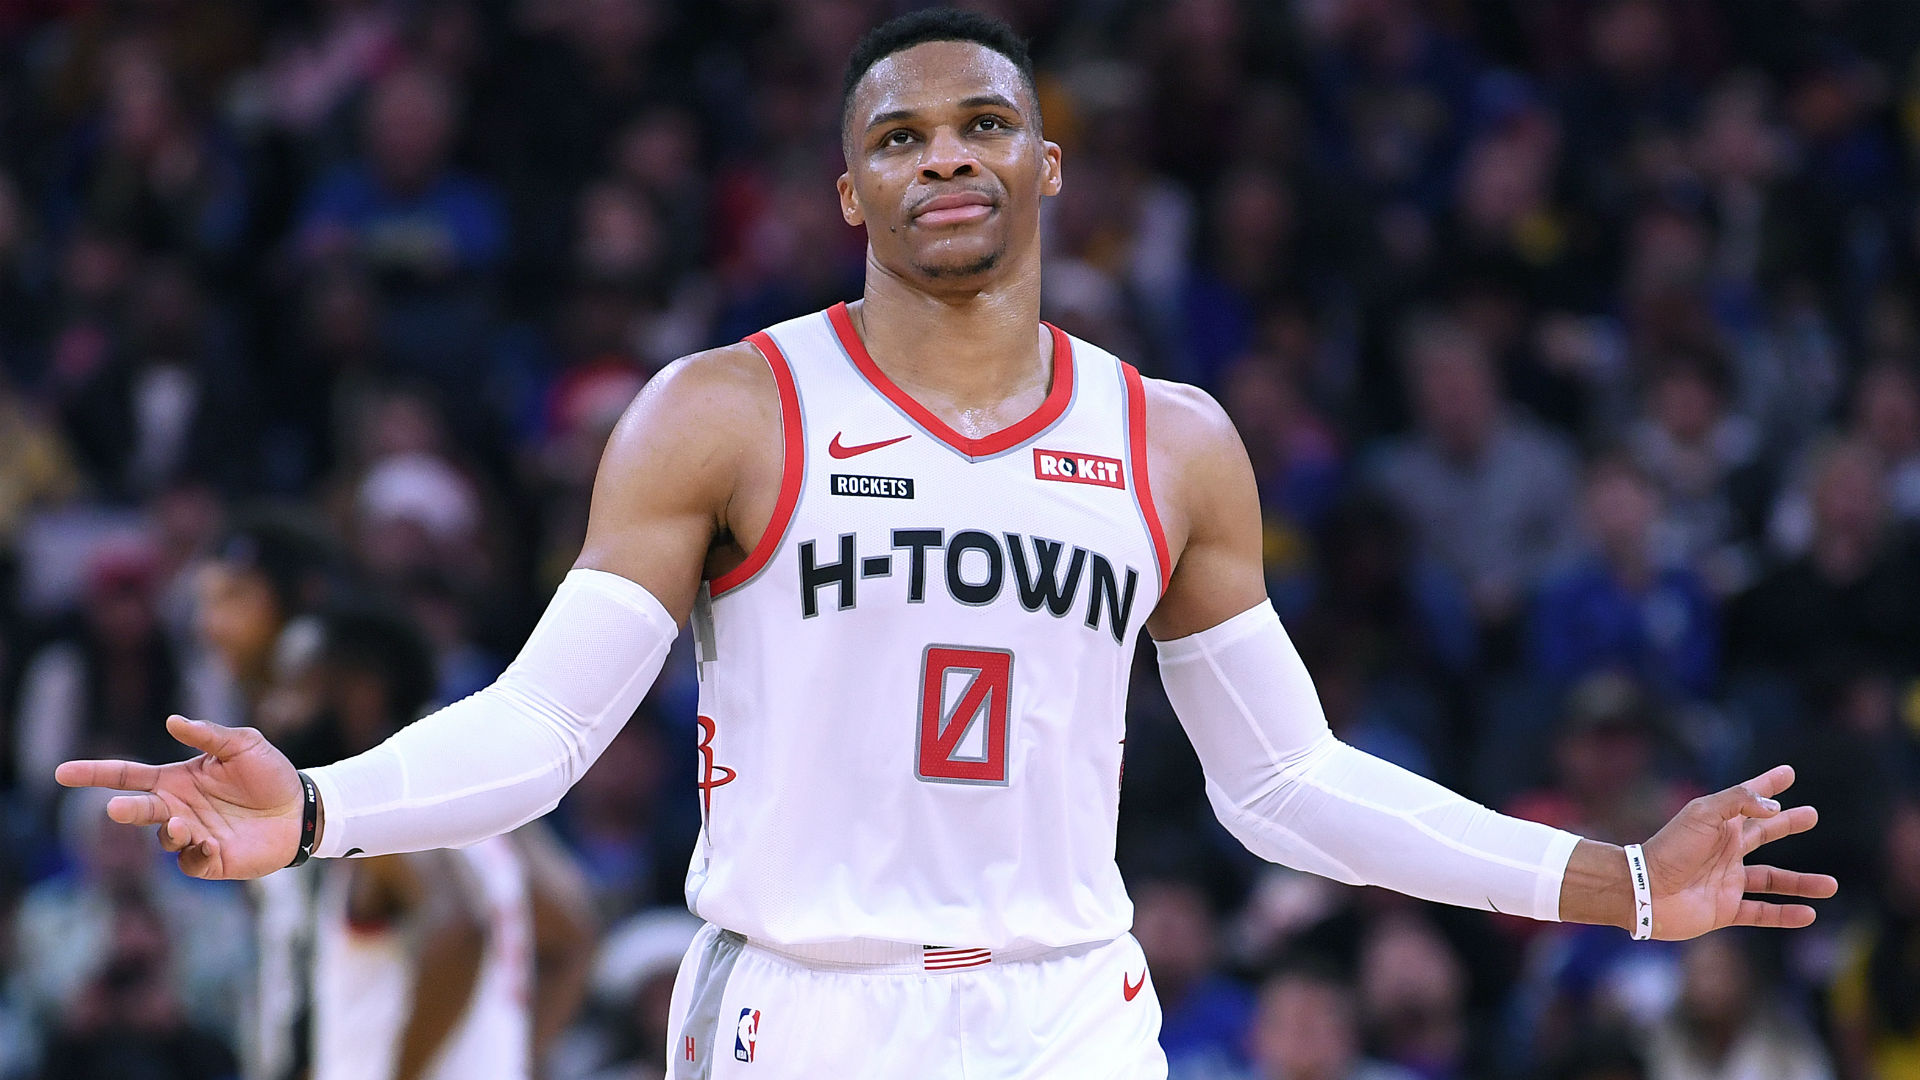 After being ejected in the fourth quarter of the Rockets' win over the Warriors, Russell Westbrook felt singled out.